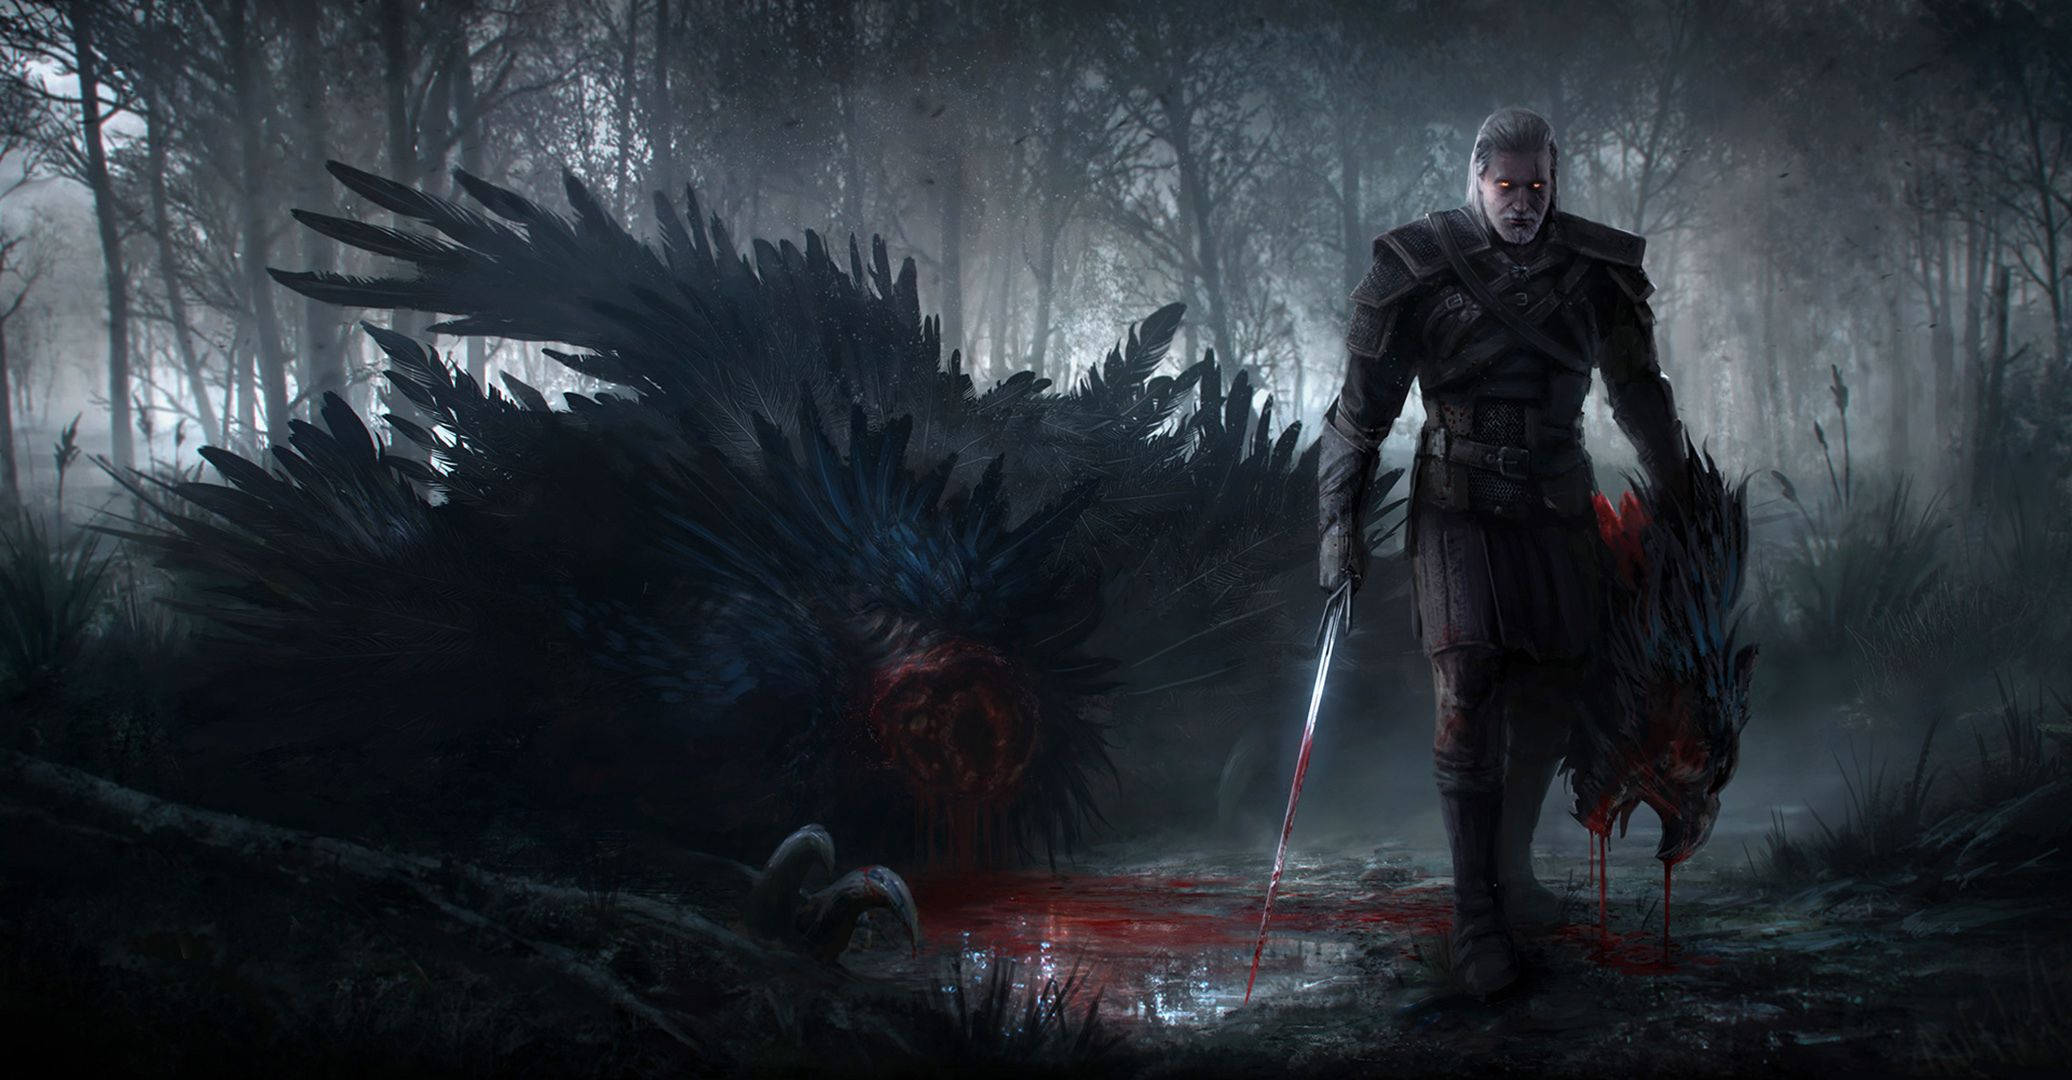 The Witcher 3 Hd Wallpaper Background